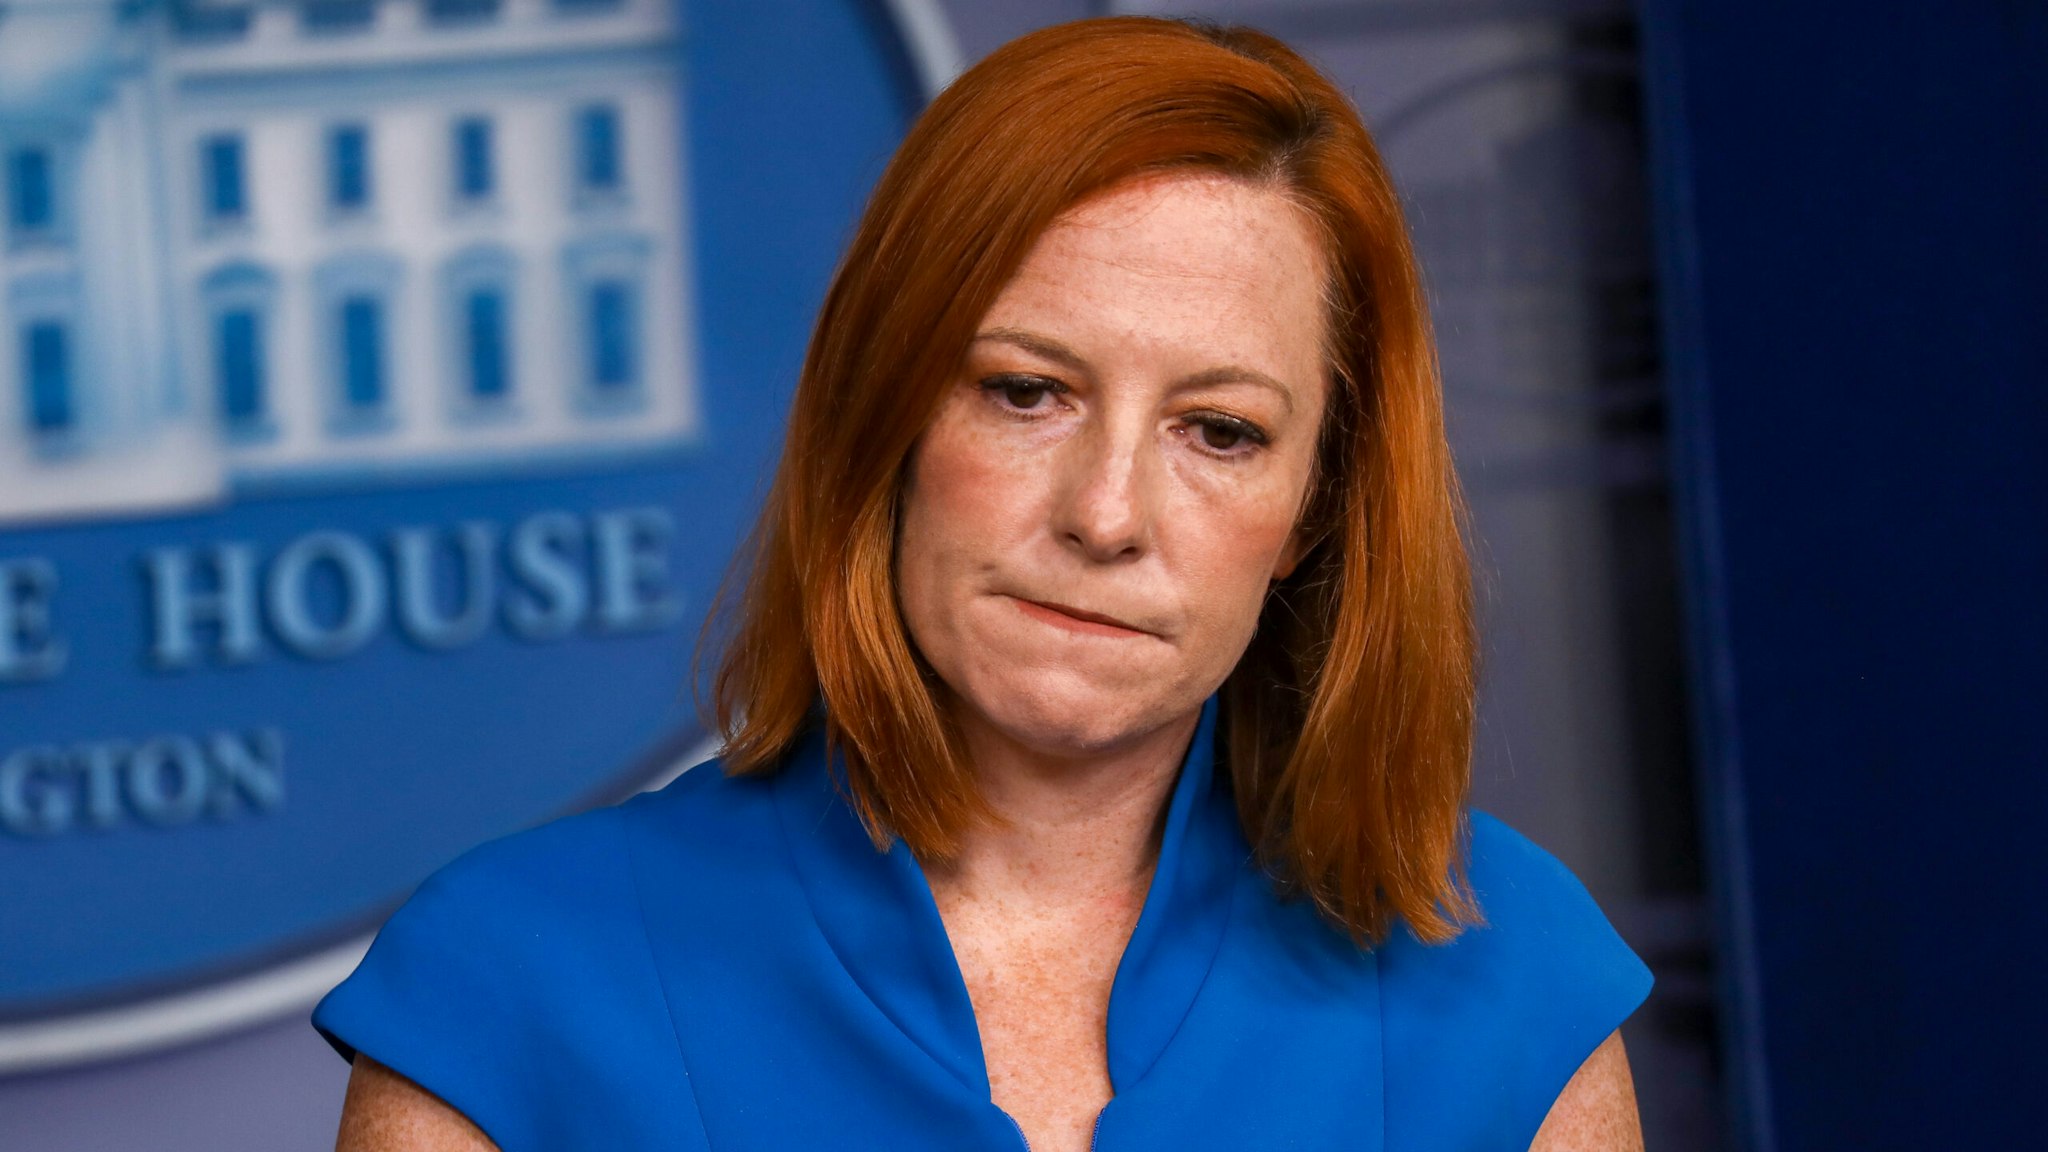 WASHIGTON, DC - AUGUST 11: White House Press Secretary Jen Psaki makes a speech during the daily press briefing at the James Brady Press Briefing Room of the White House, in Washington, DC, United States on August 11, 2021.